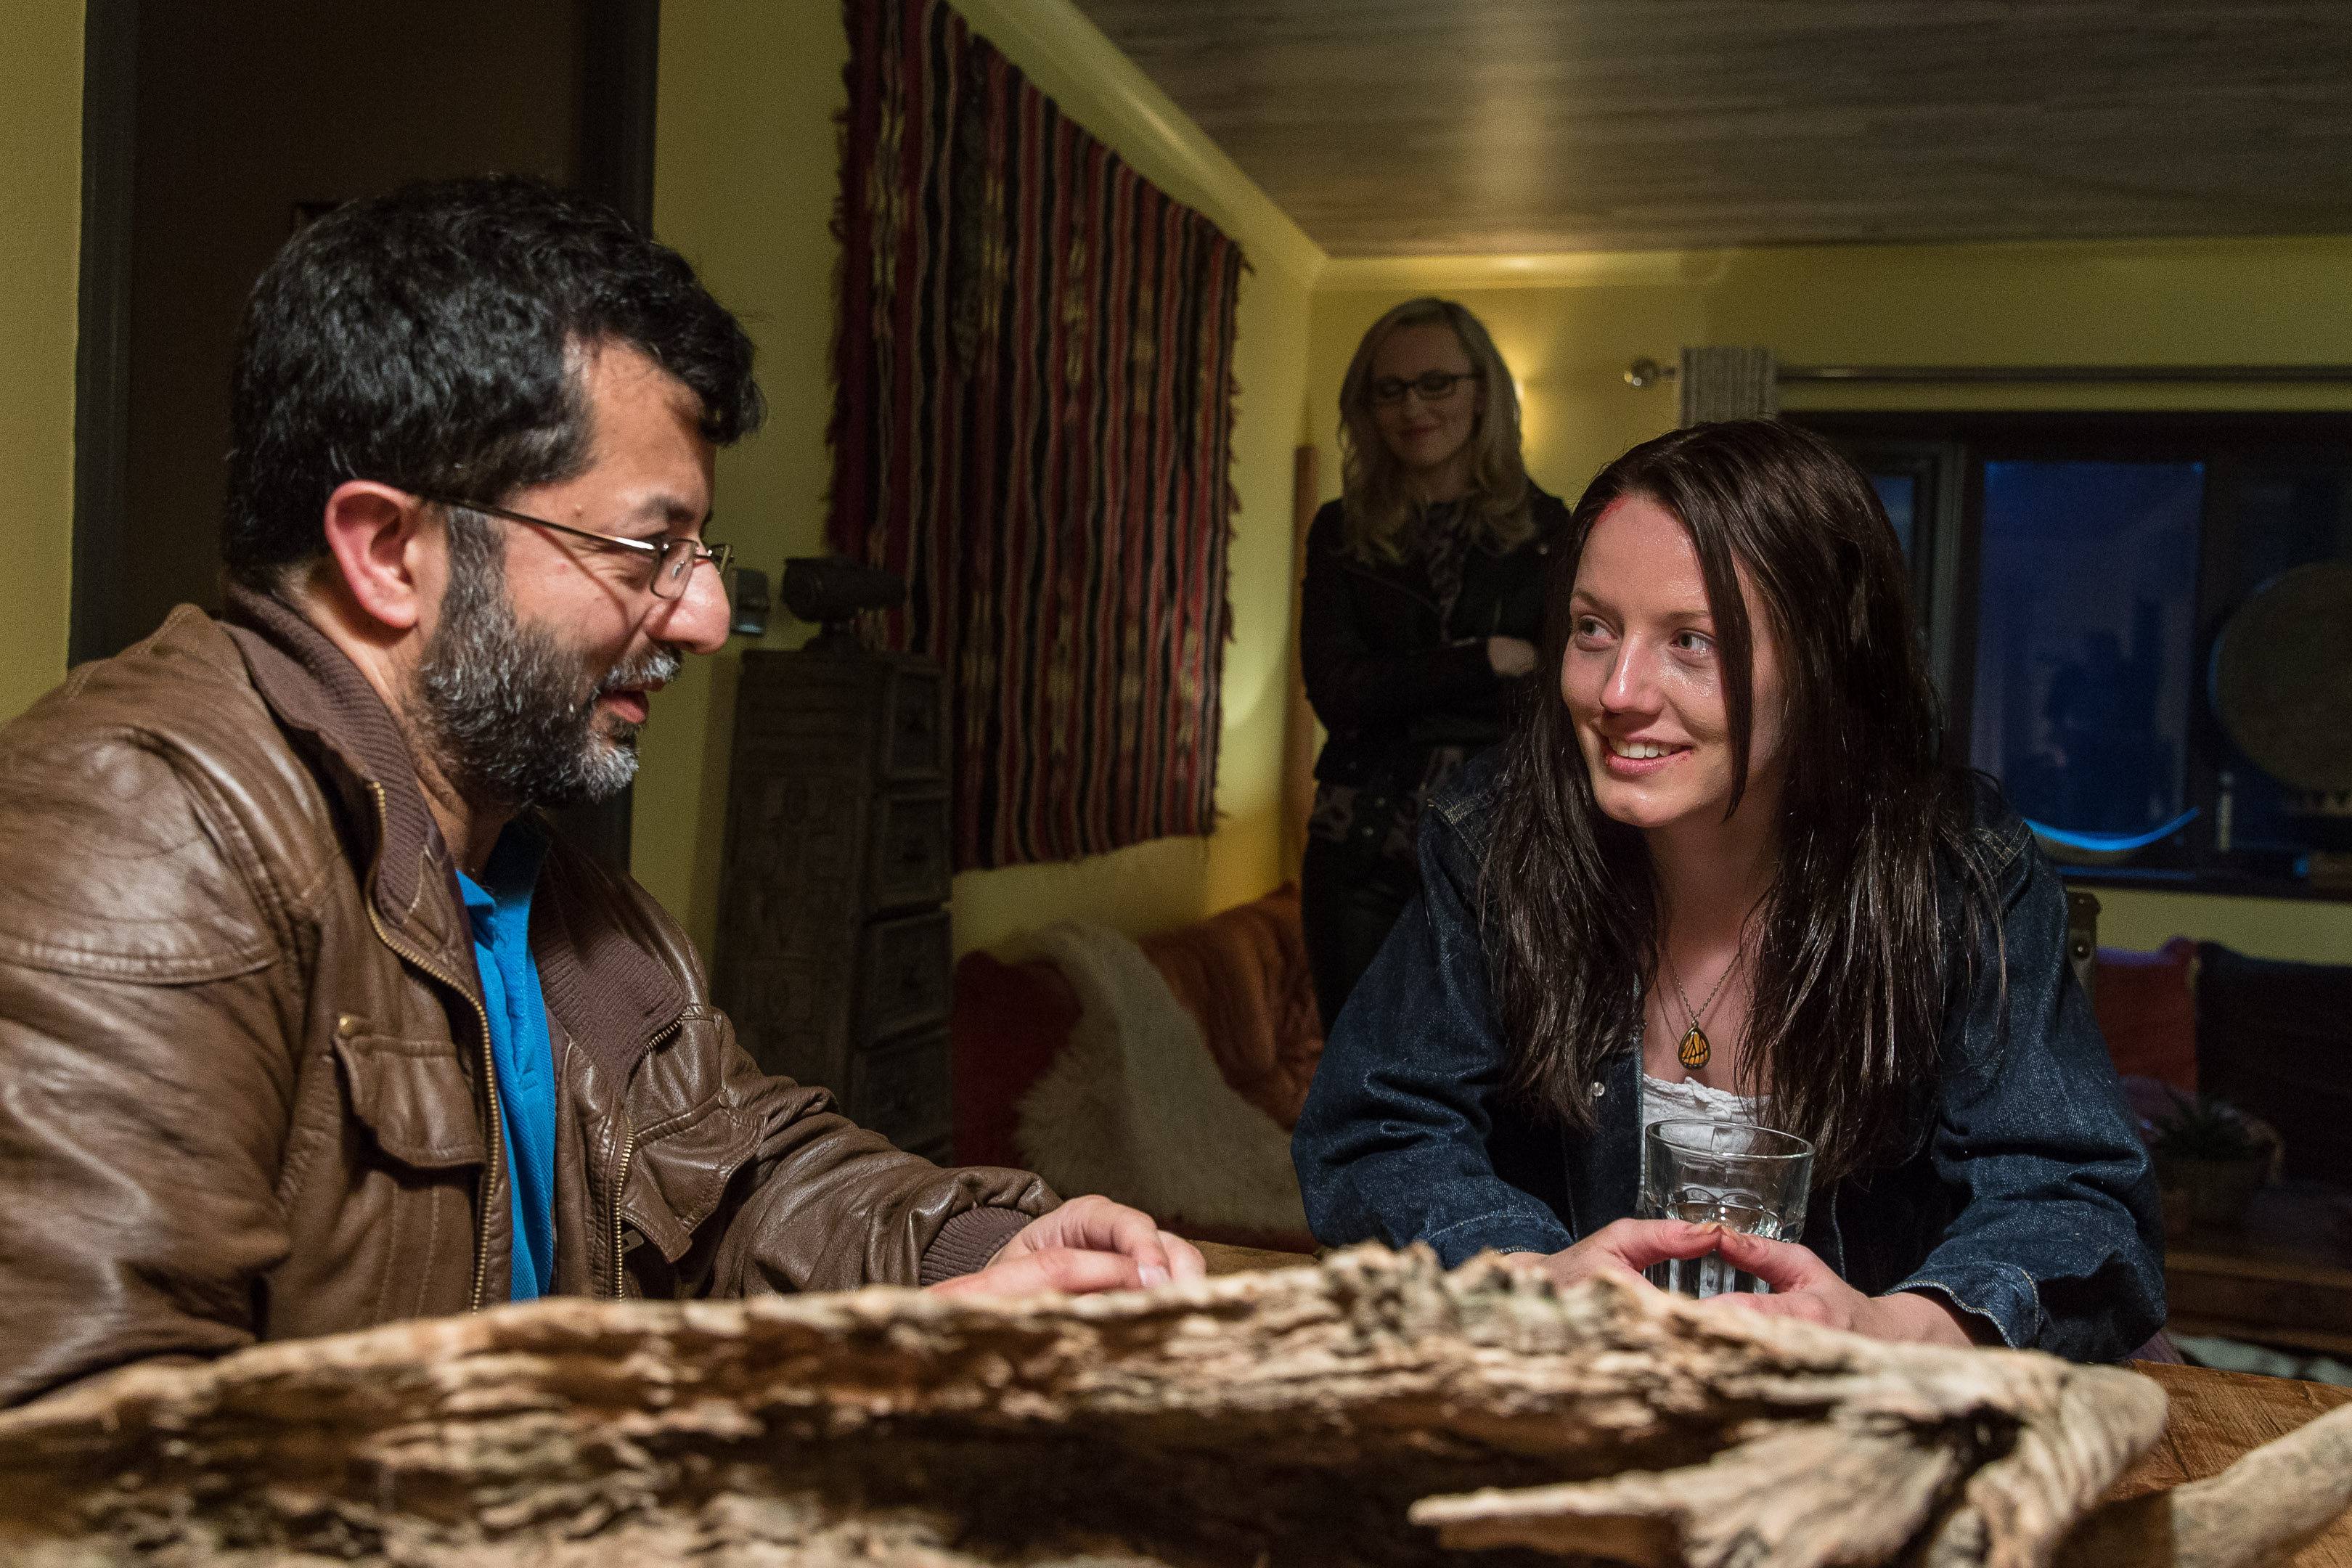 Still of Mhairi Calvey as 'Crystal' talking with director Ilyas Kaduji on the set of 'Abduct' (2014)